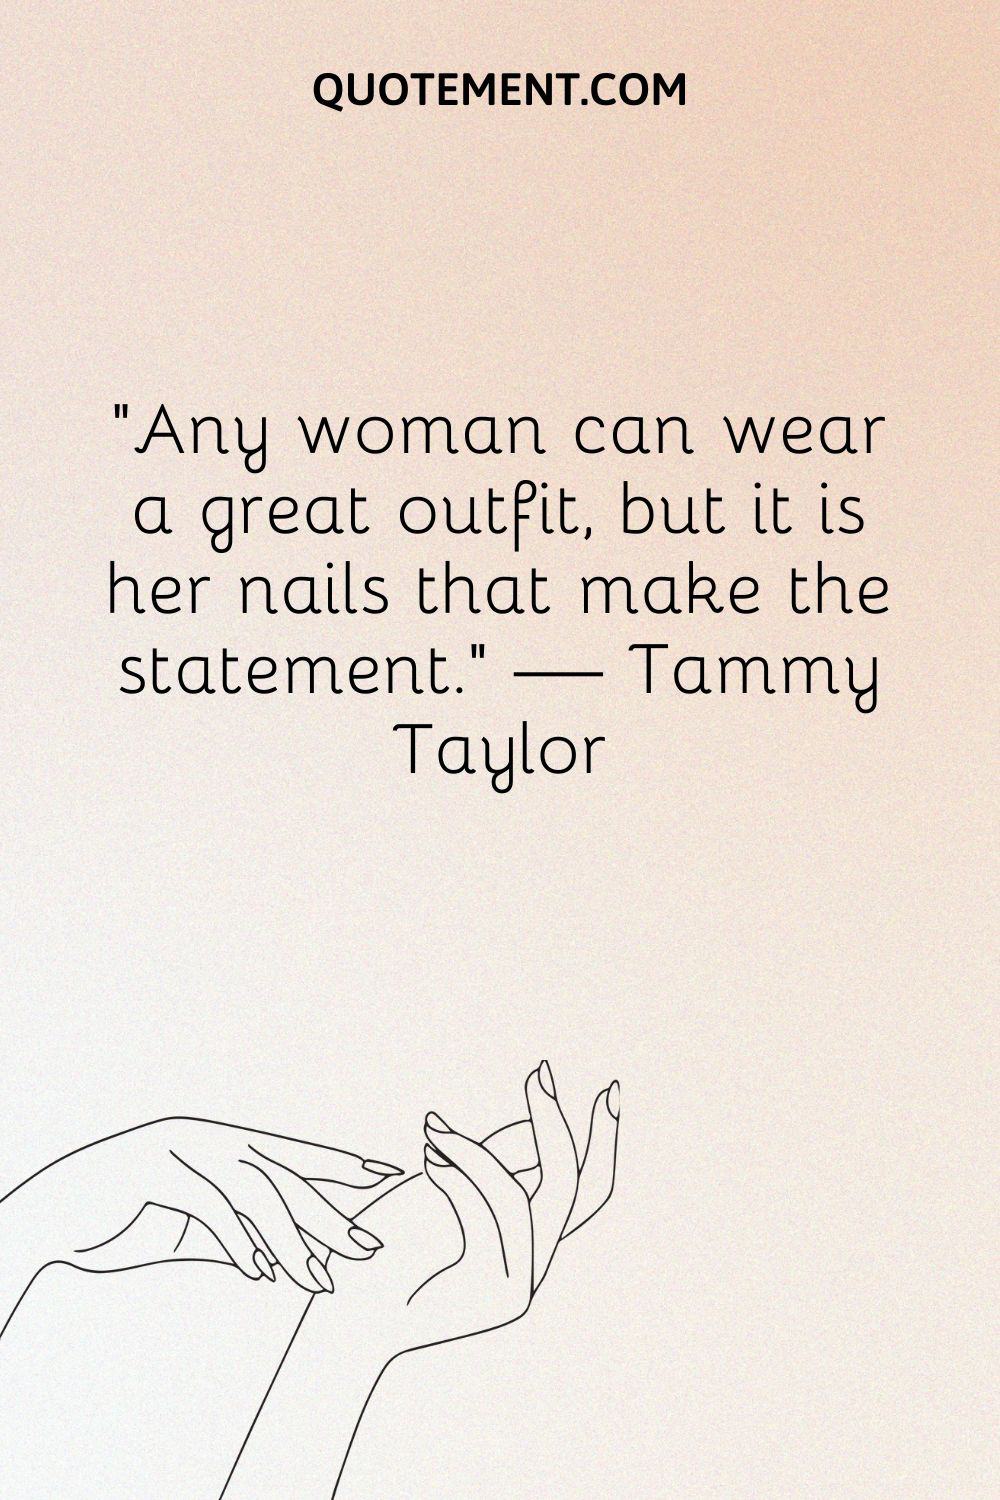 illustration of a butterfly on a woman's finger representing classy quote about nails